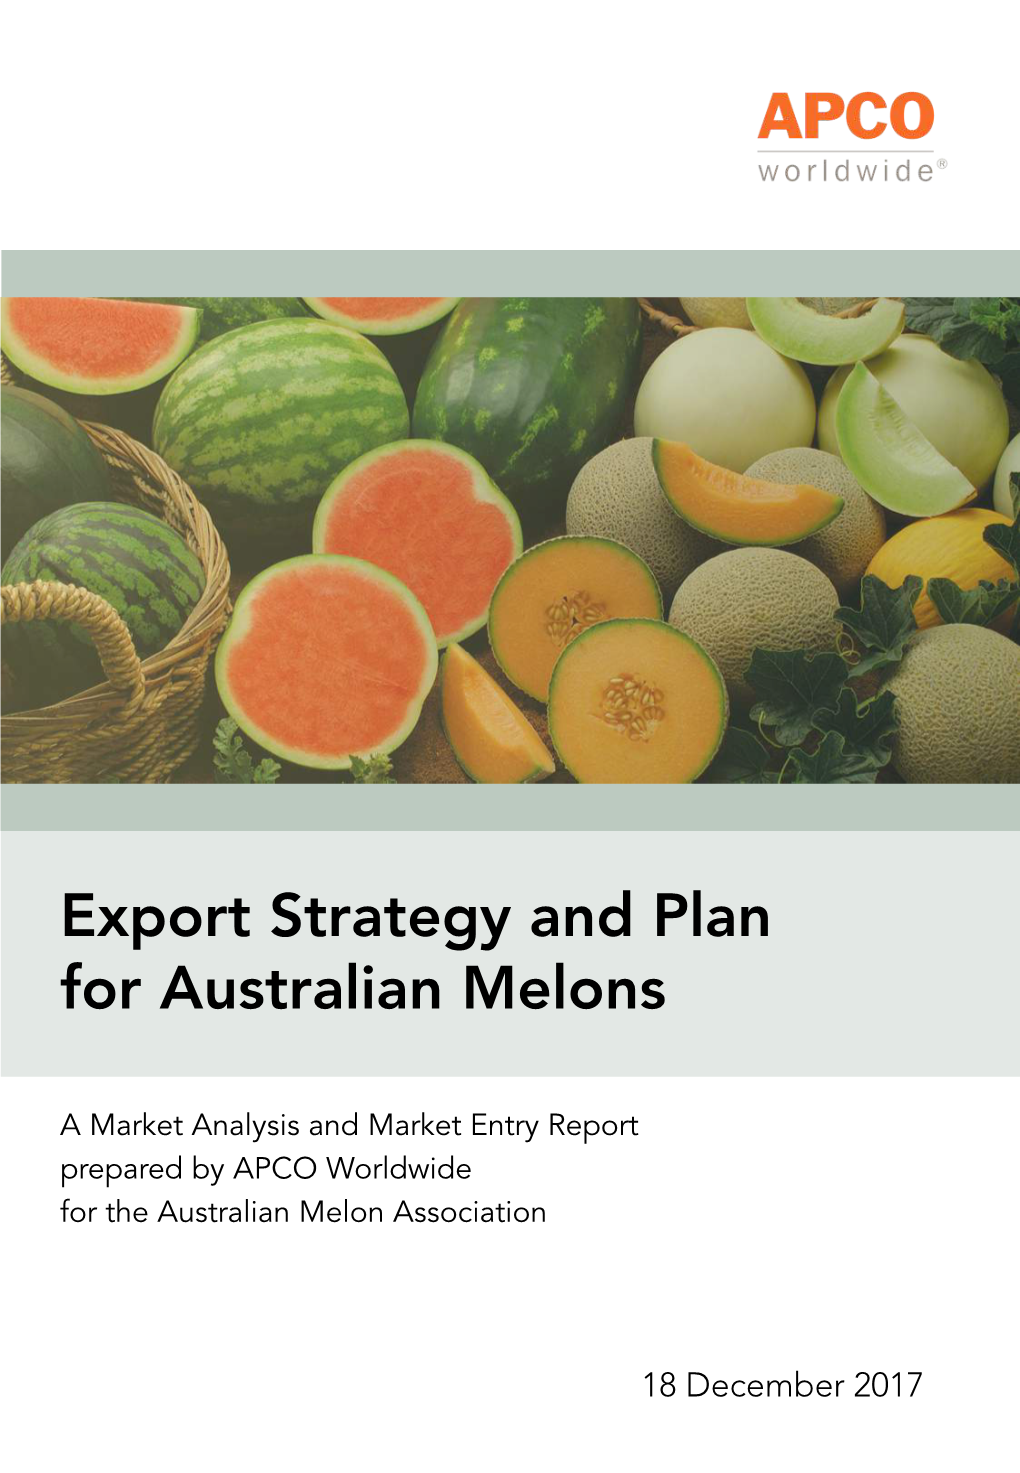 Export Strategy and Plan for Australian Melons